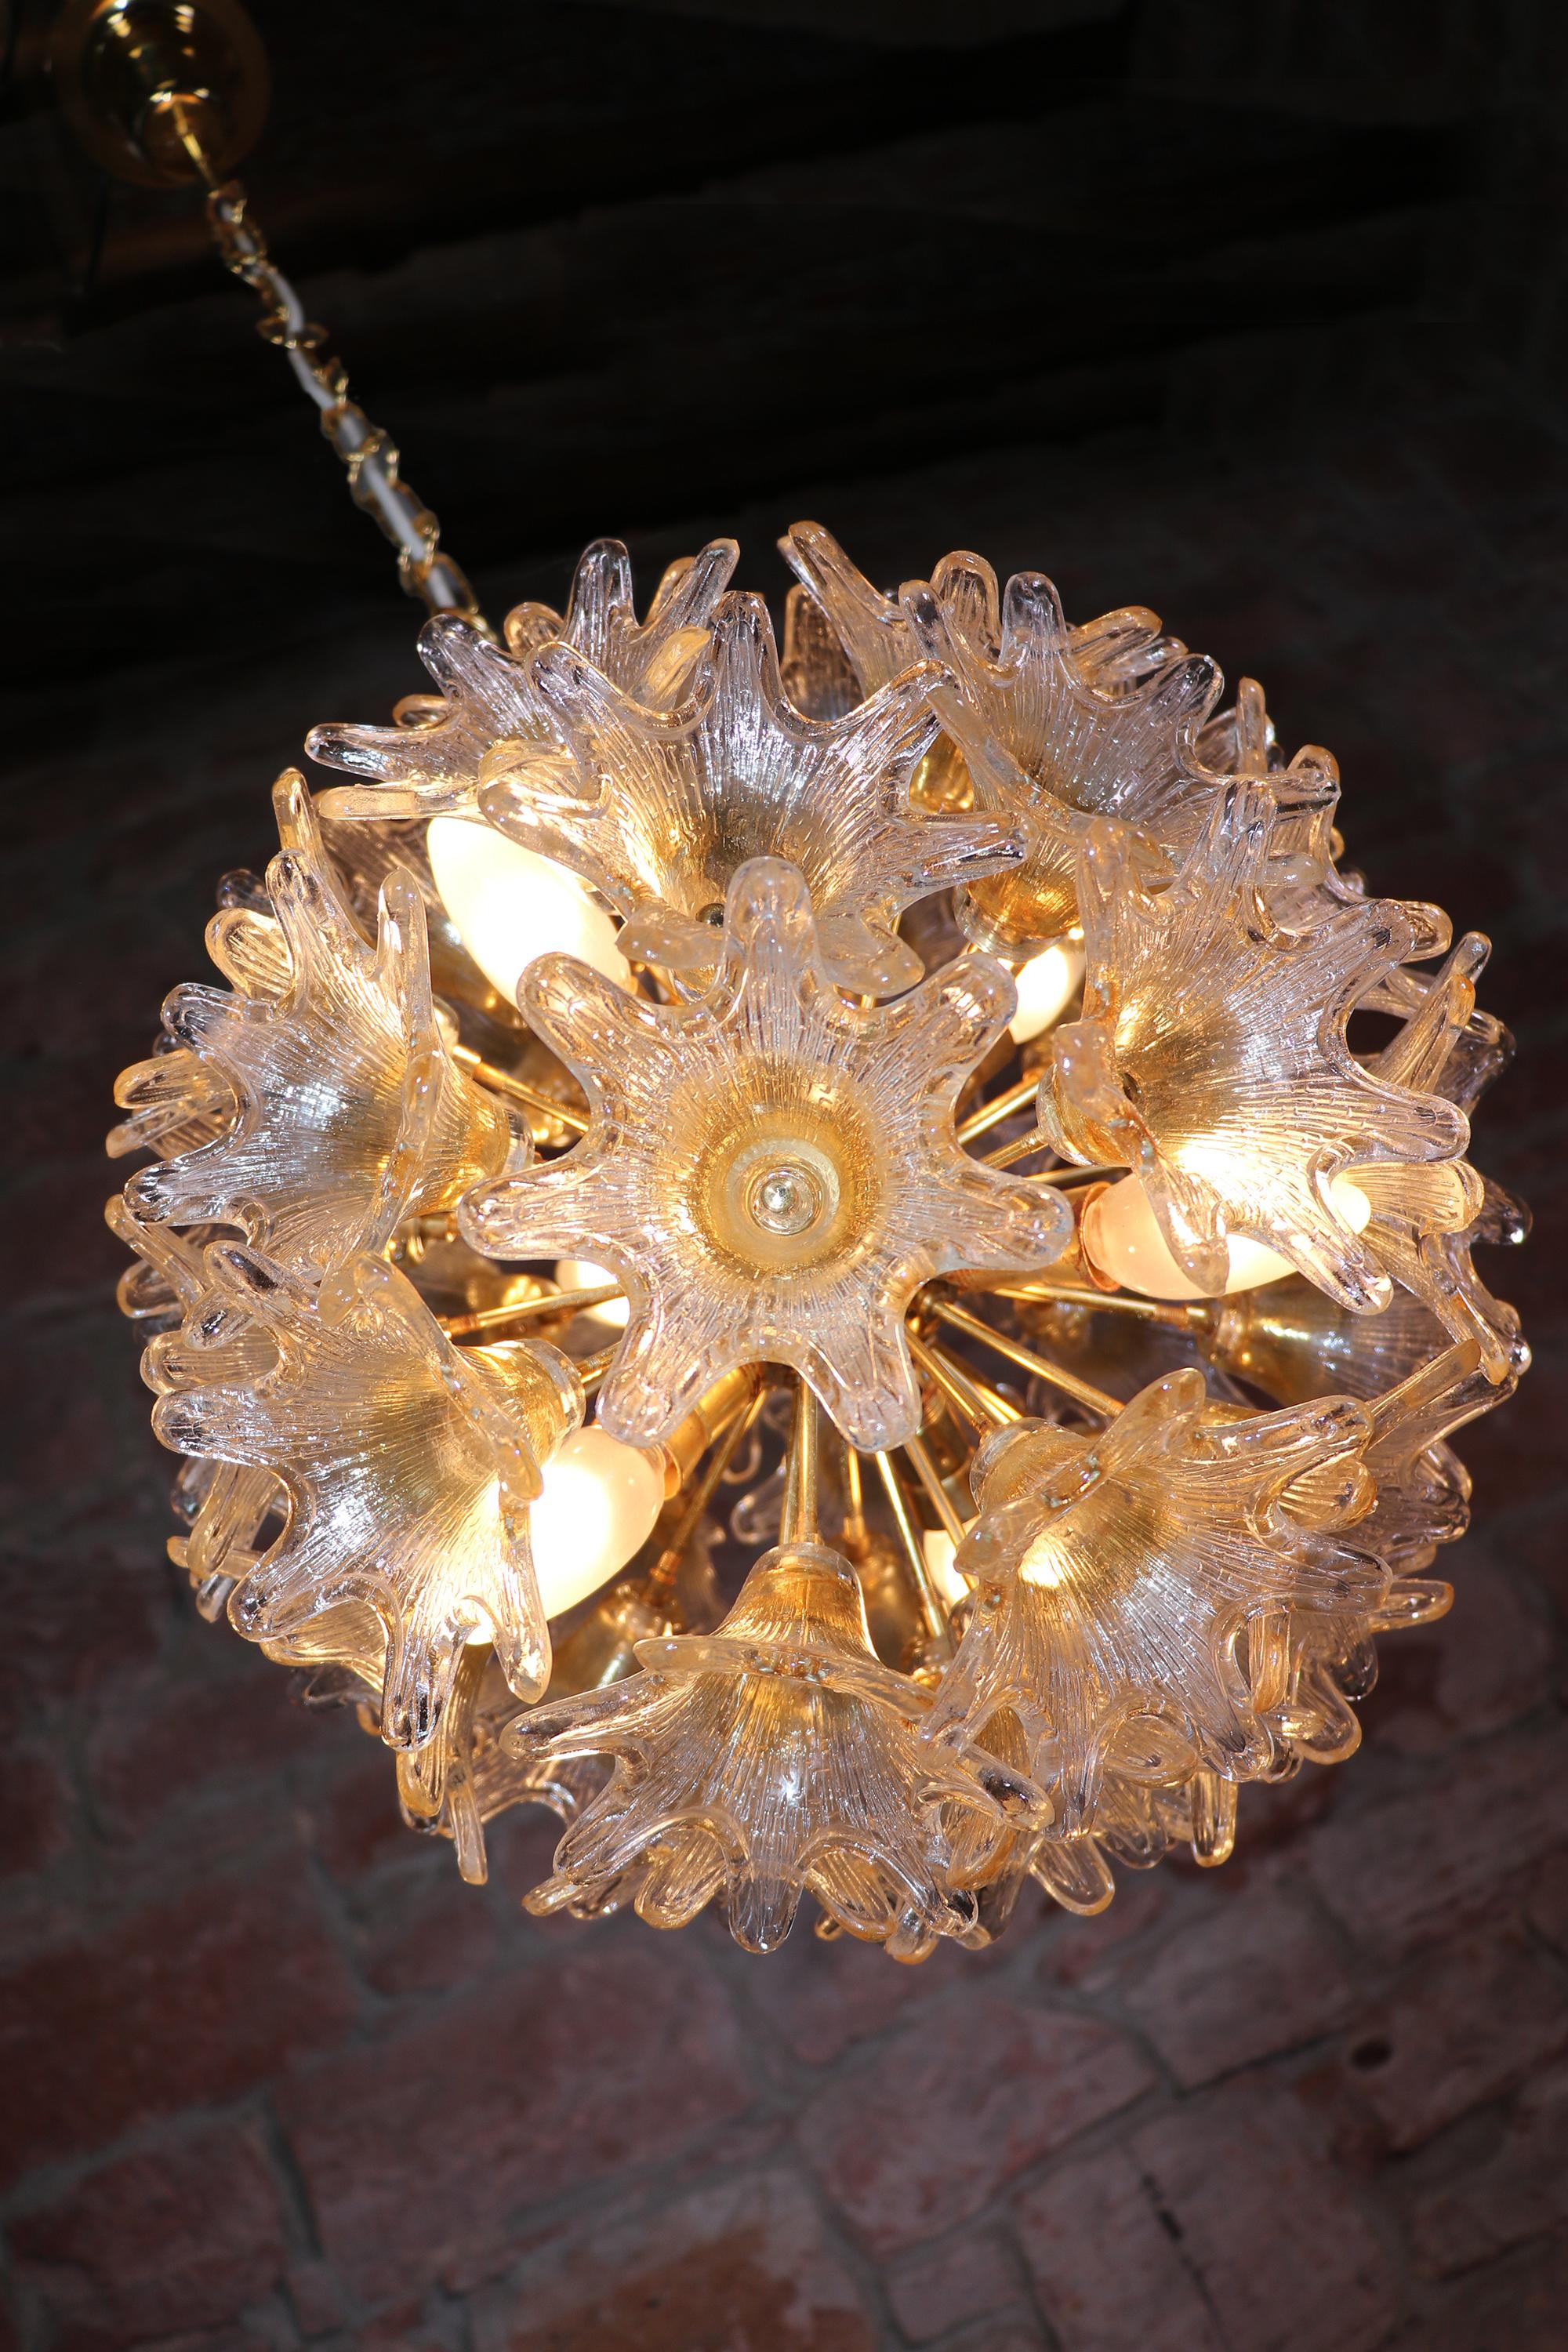 Elegant sputnik chandelier with star-shaped amber glass flowers on a gilded brass frame. Designed by Paolo Venini. Star-shaped glasses resembles flowers. Chandelier illuminates beautifully and offers a lot of light. Newly rewired with six sockets.